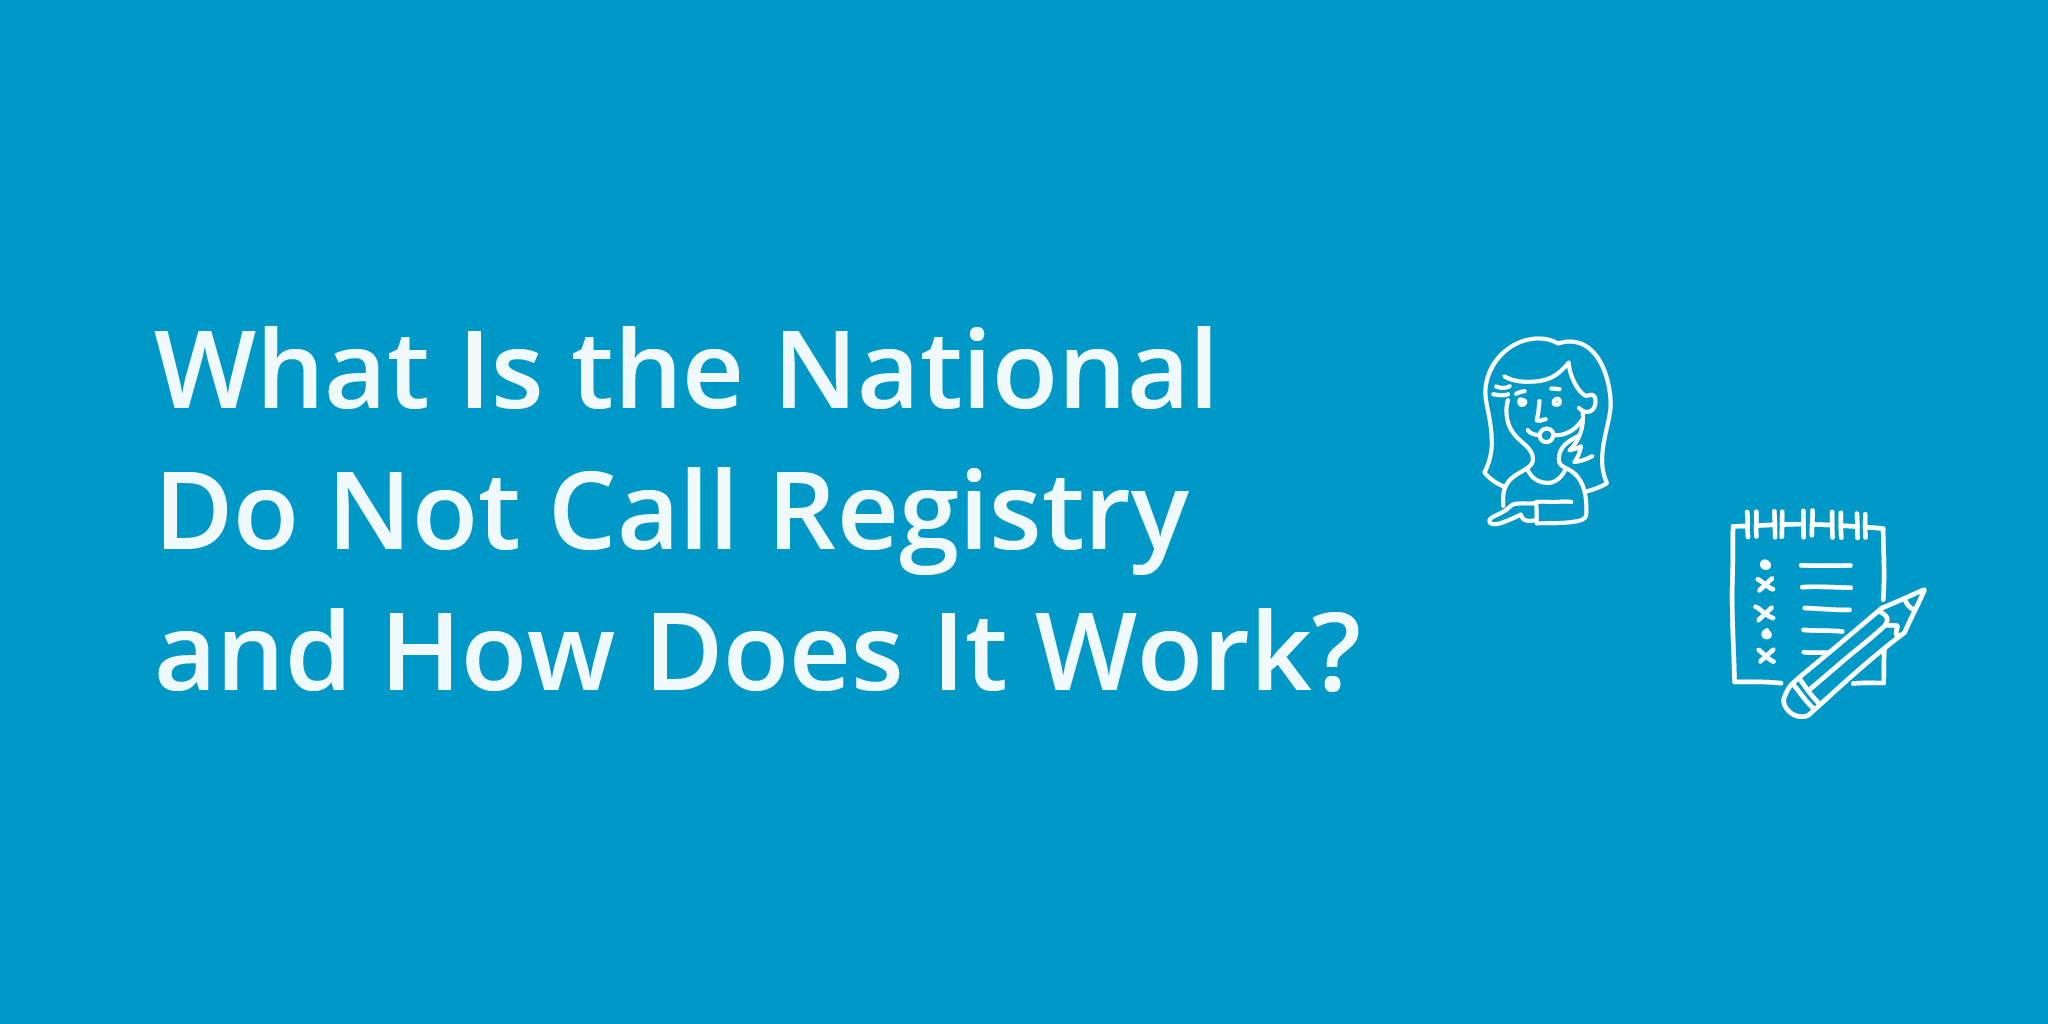 What Is the National Do Not Call Registry and How Does It Work? | Telephones for business